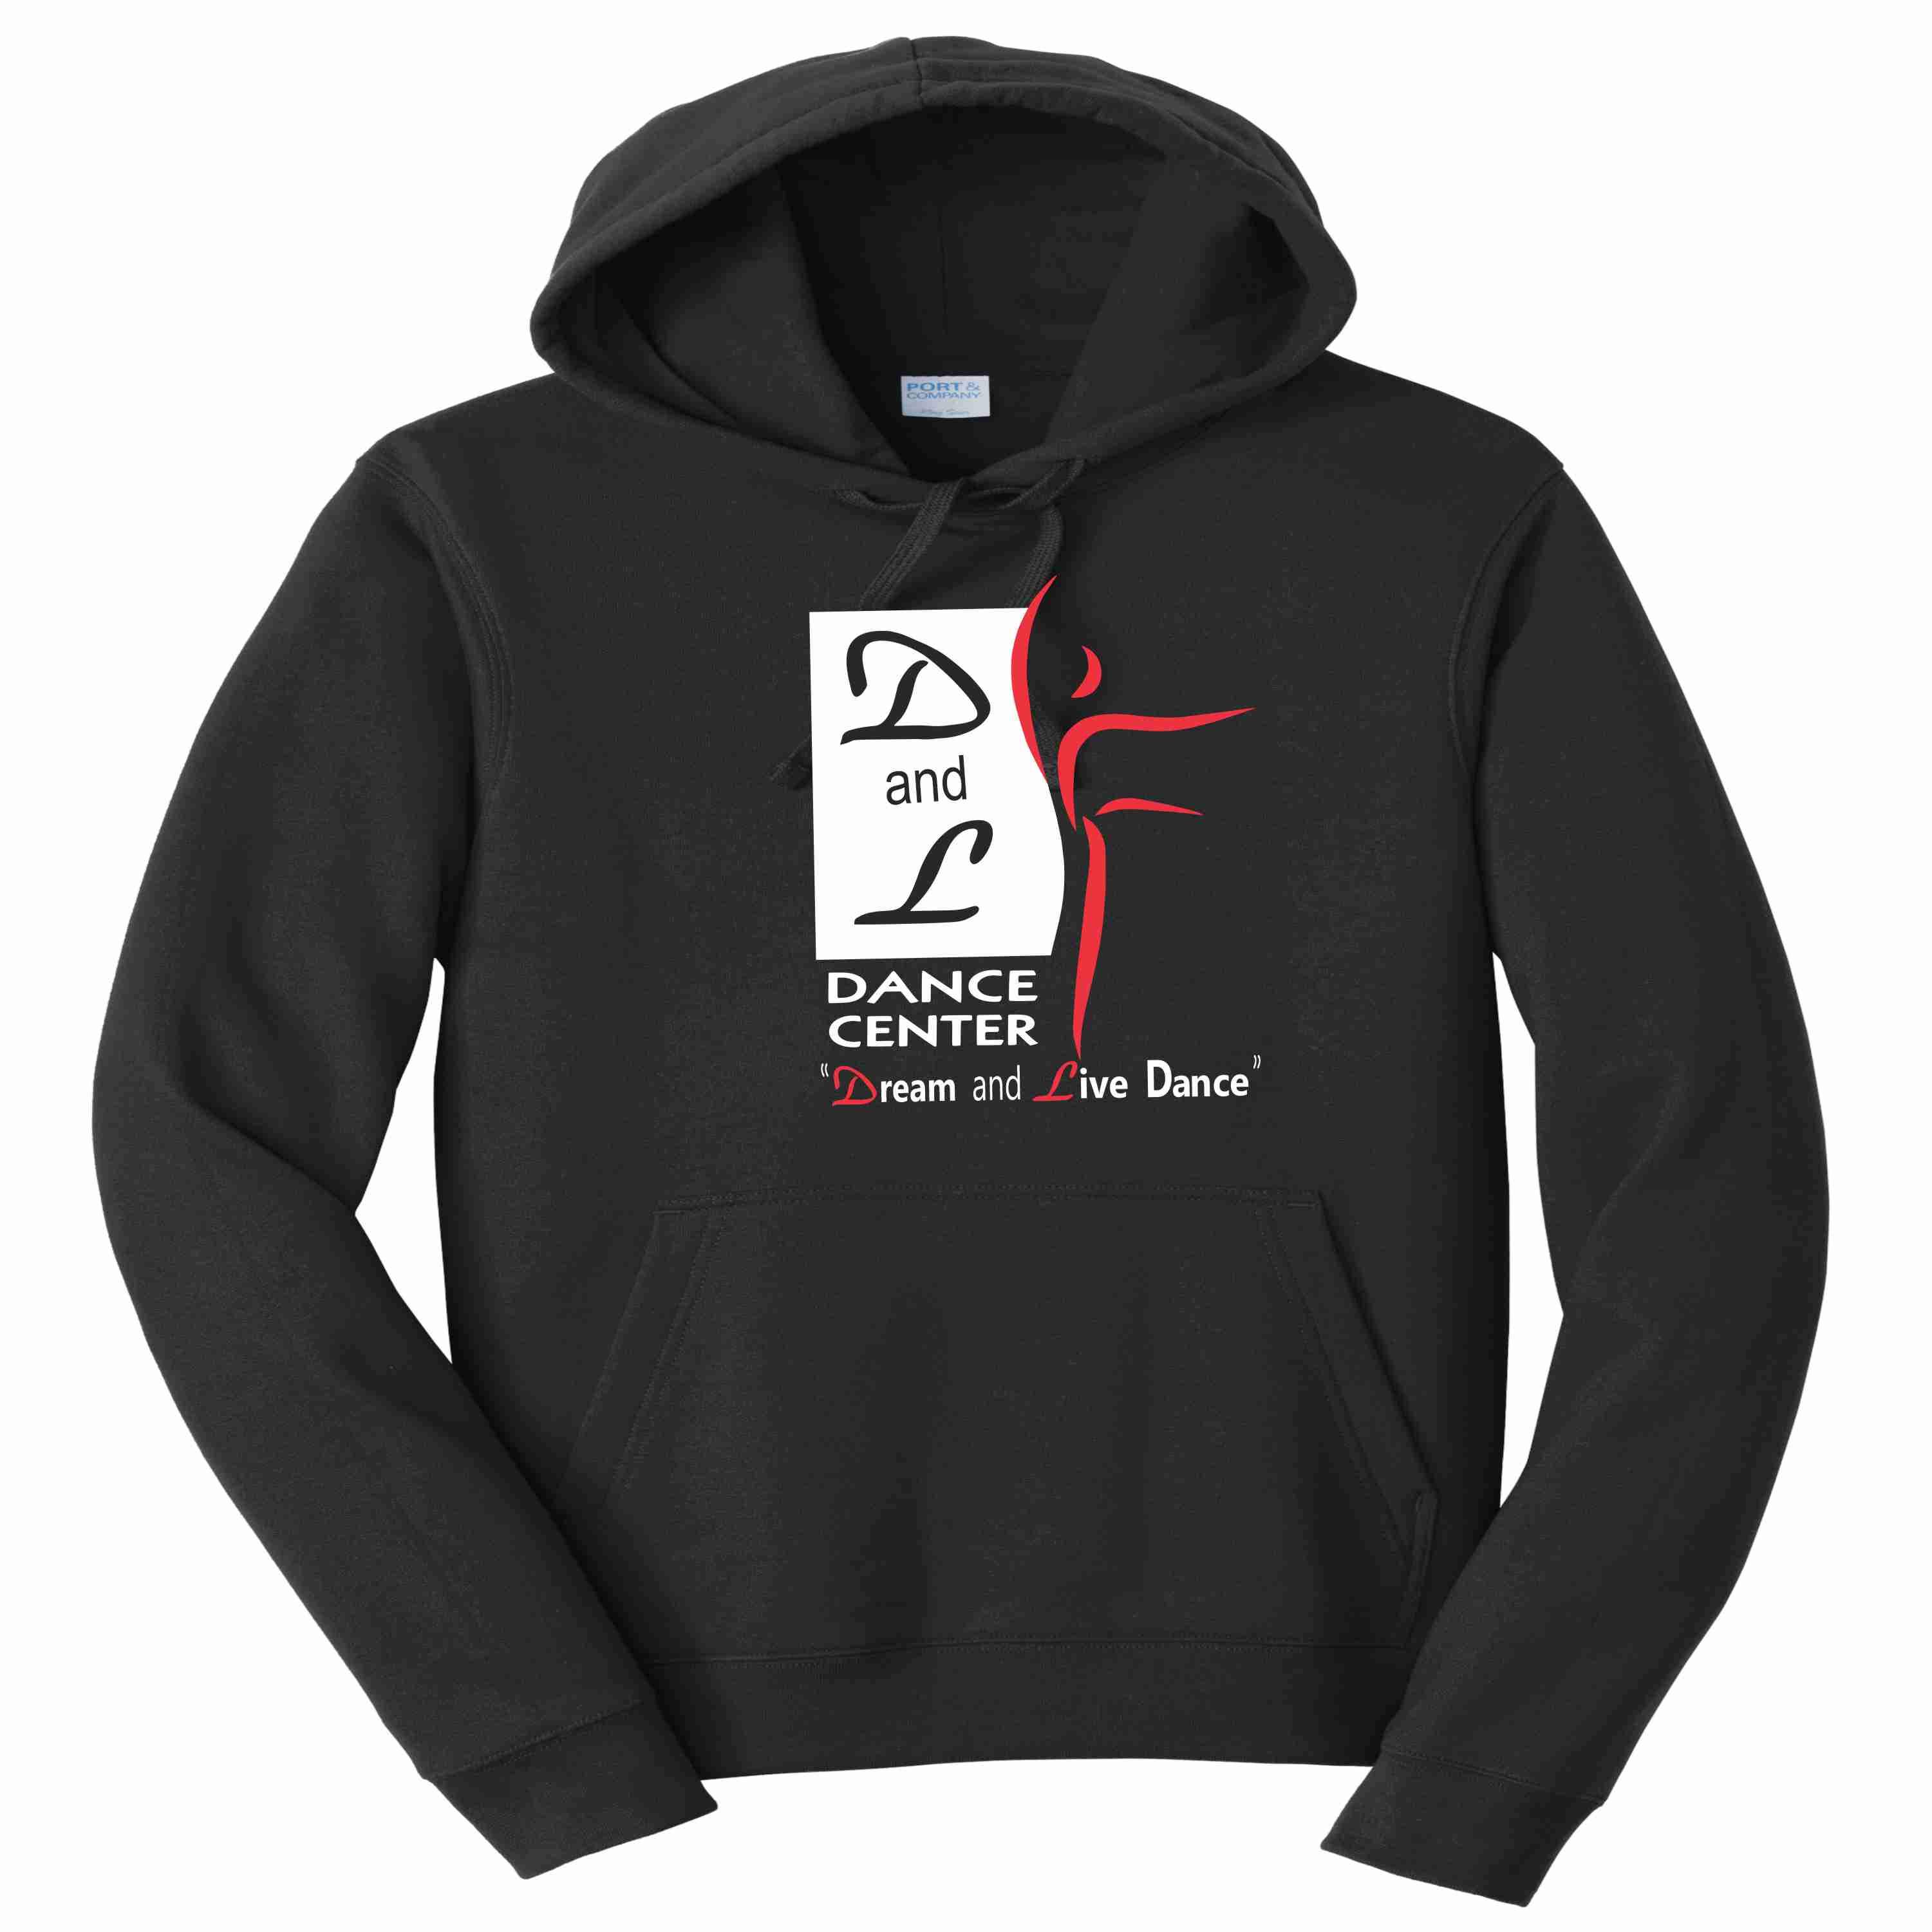 D and L Dance Center Adult and Youth Matte Print Hooded Sweatshirt-Black Hoodie Sweatshirt Becky's Boutique Youth XS 